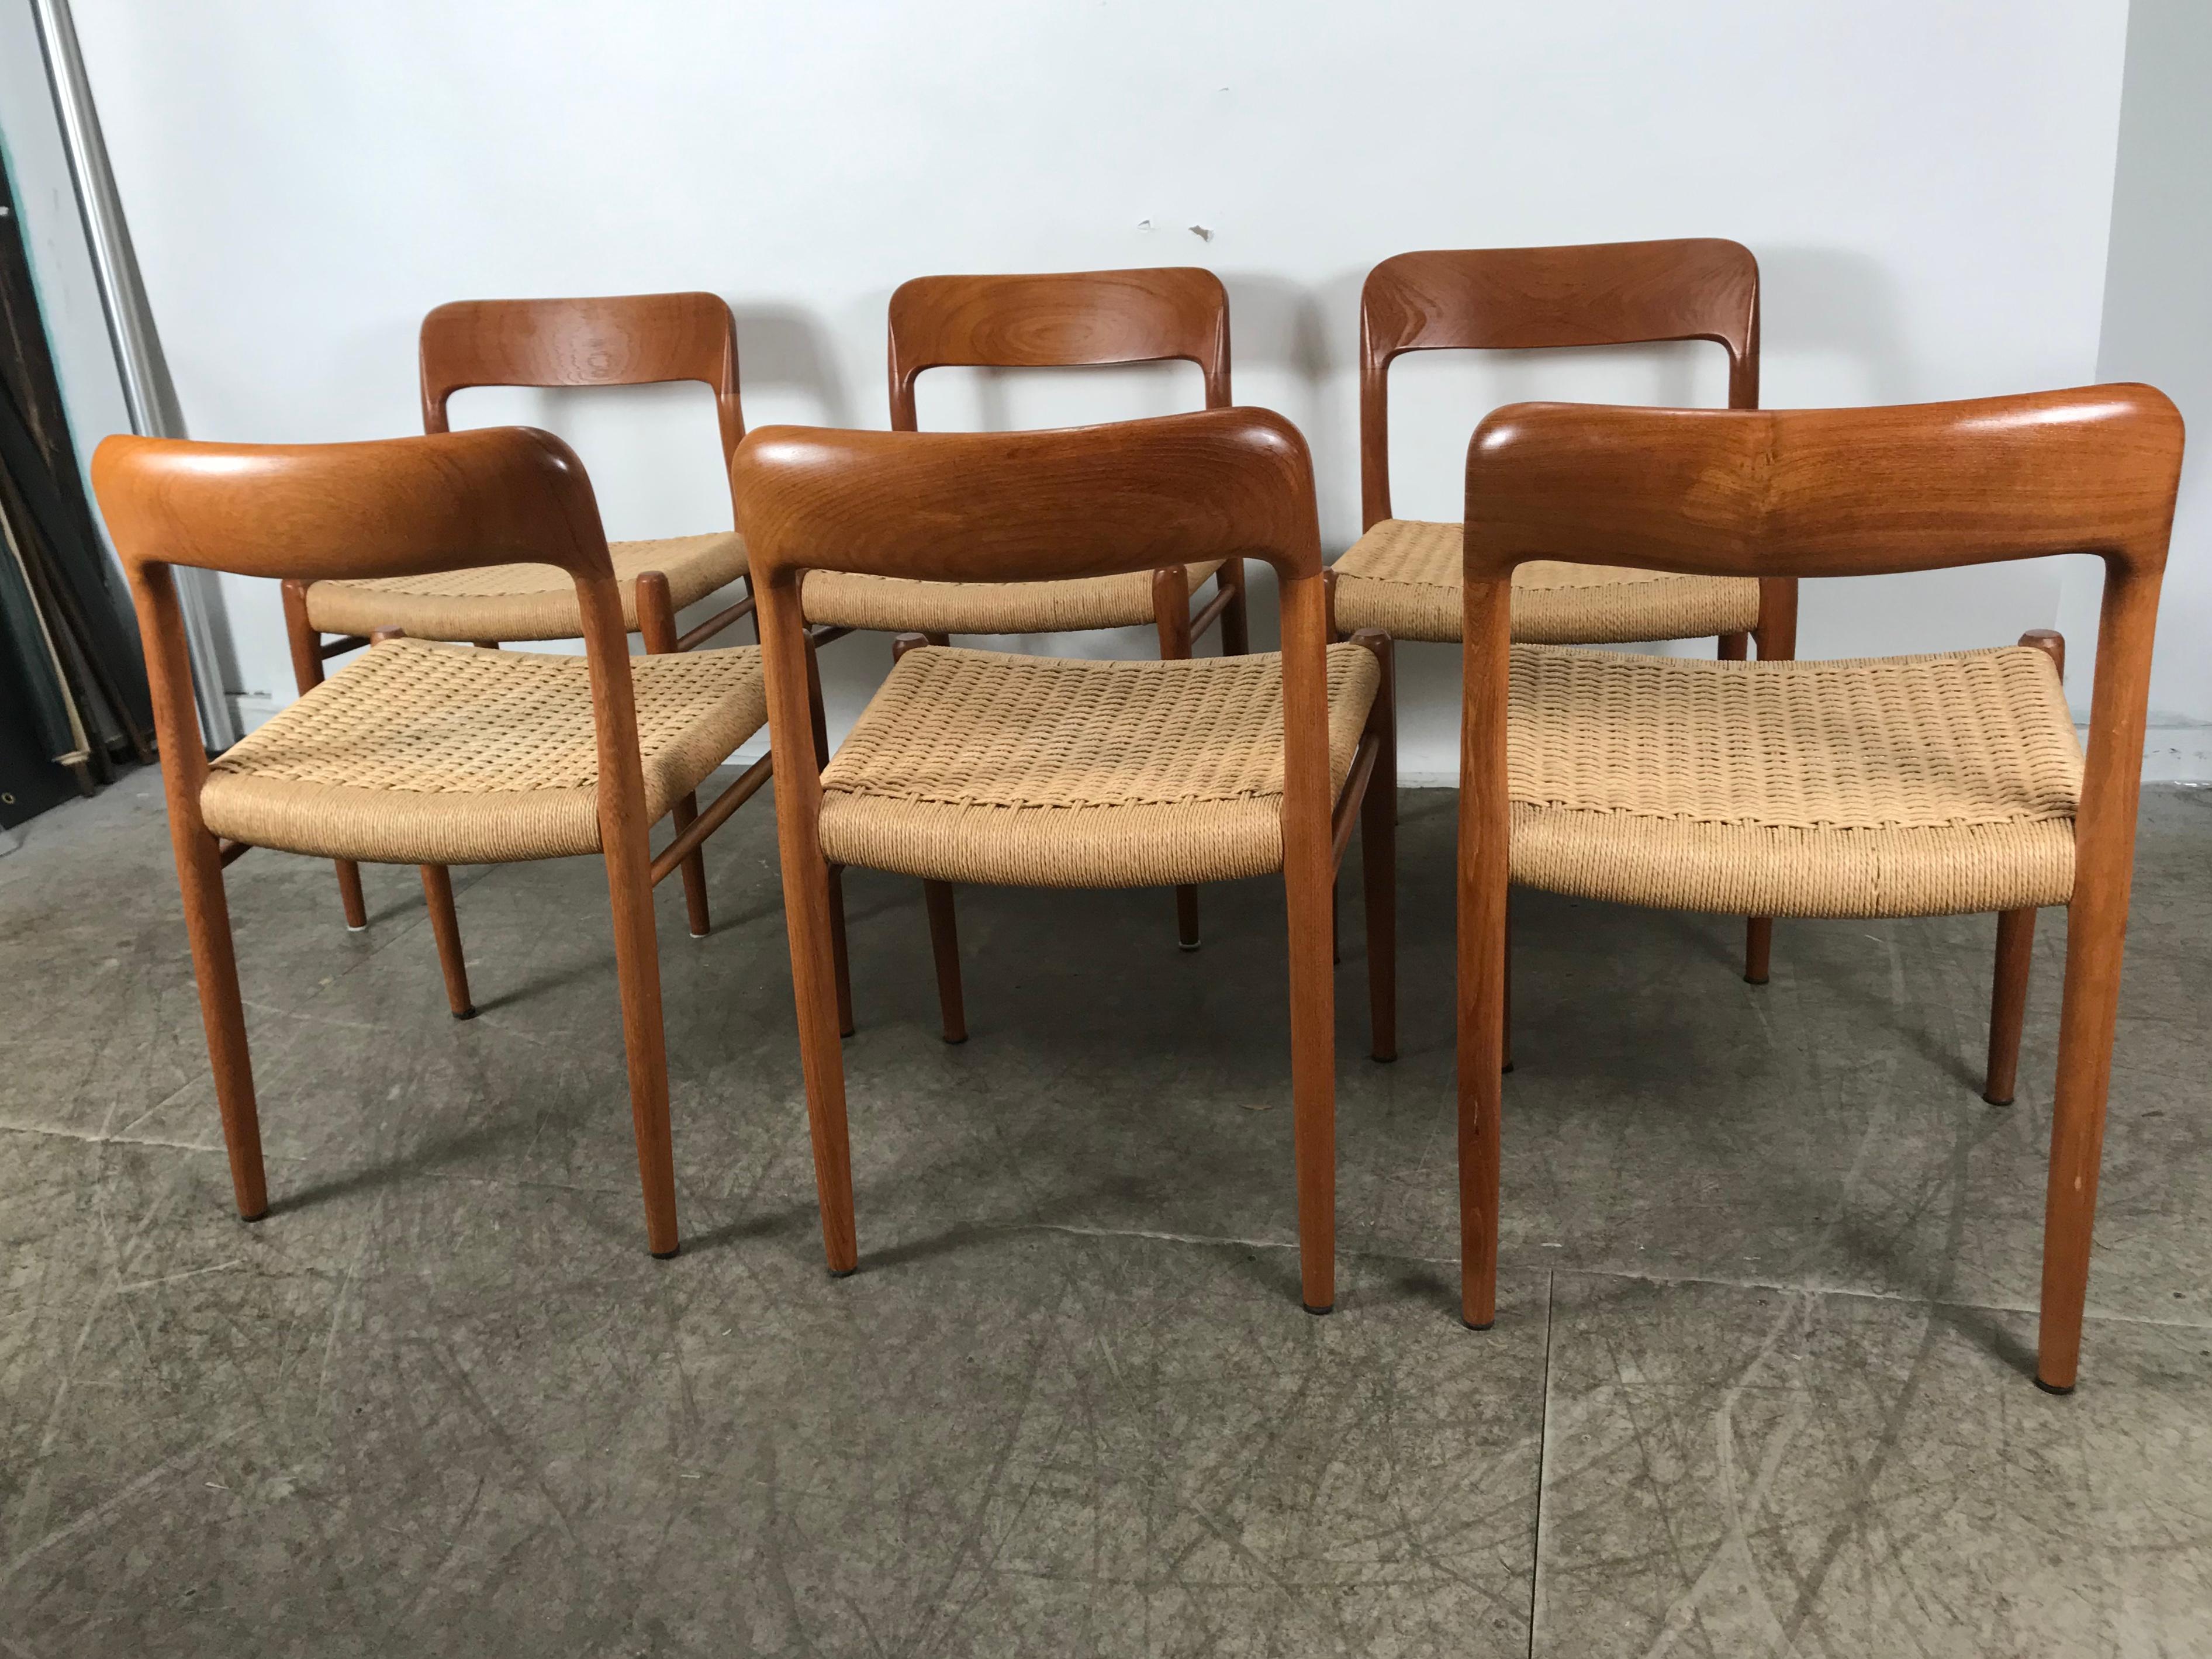 Classic Set 6 Teak and Cane Dining Chairs, Niels Moller Model 75, Denmark 1